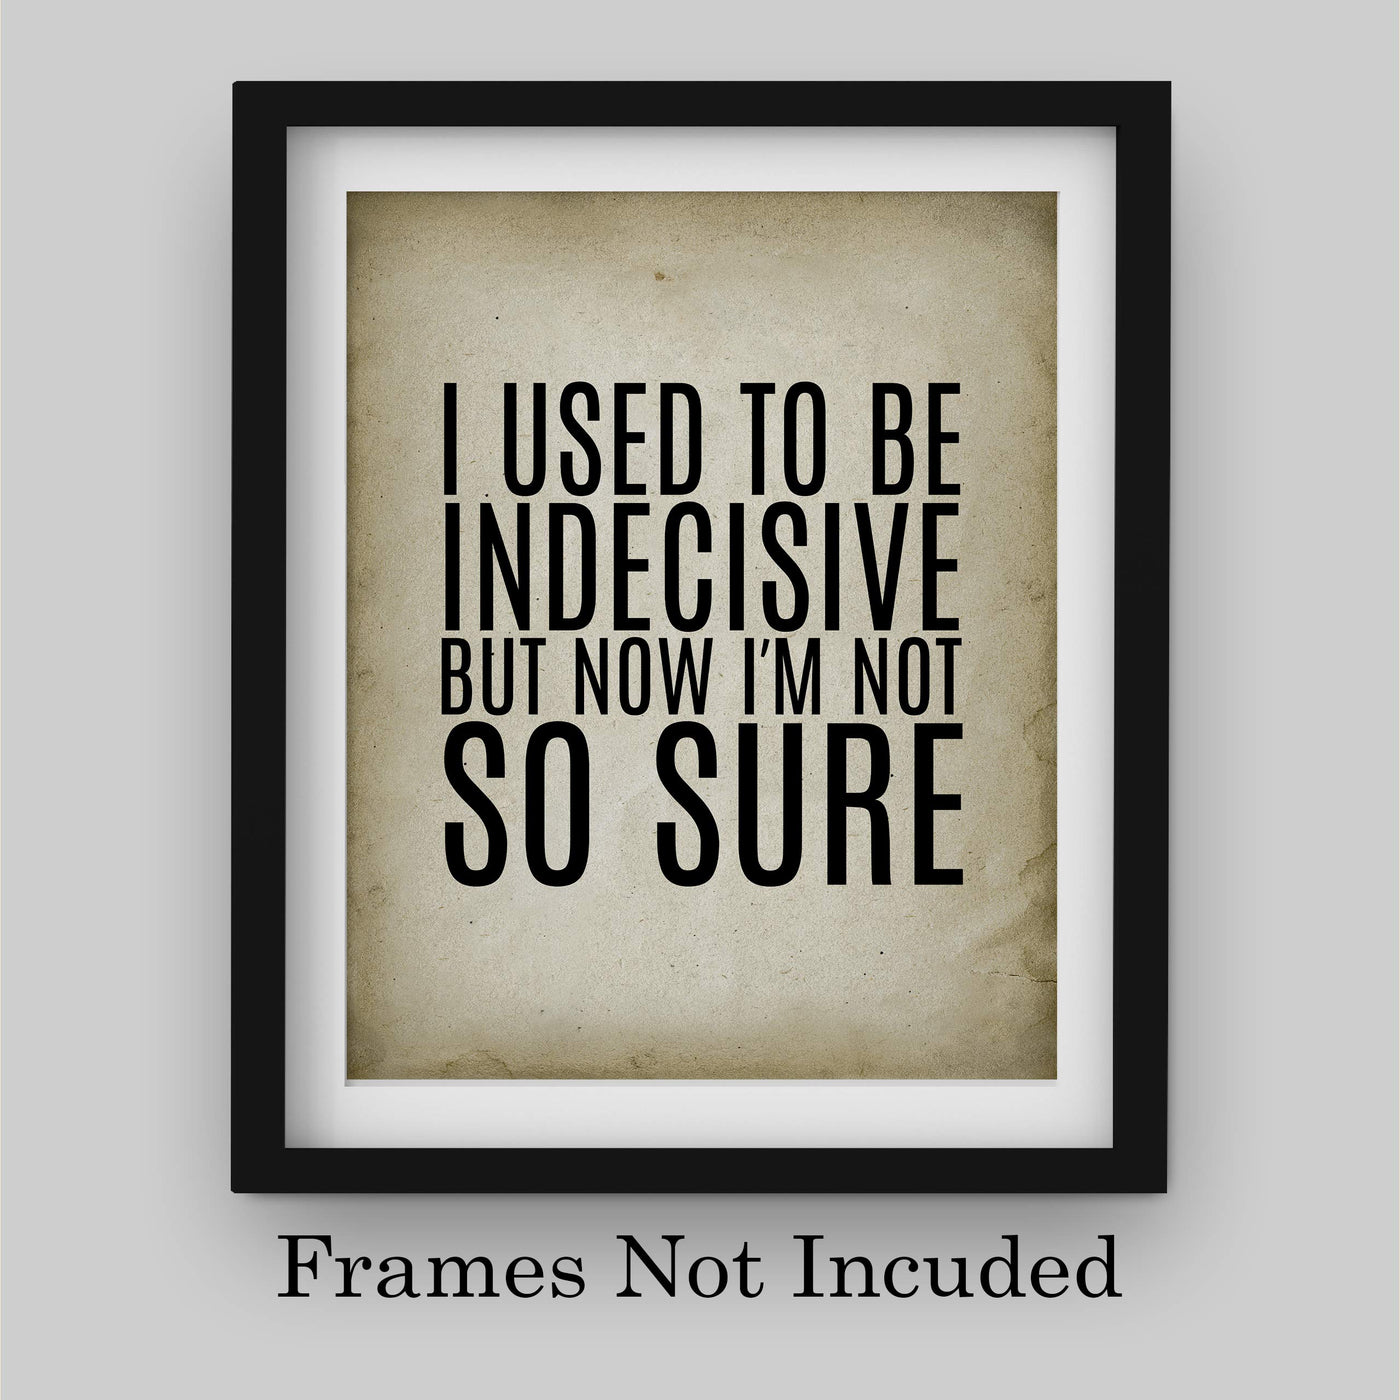 I Used To Be Indecisive-Now I'm Not So Sure Funny Wall Art Sign -8 x 10" Humorous Typographic Poster Print-Ready to Frame. Home-Office-Desk-Bar-Shop Decor. Fun Novelty Gift for Friends & Family!